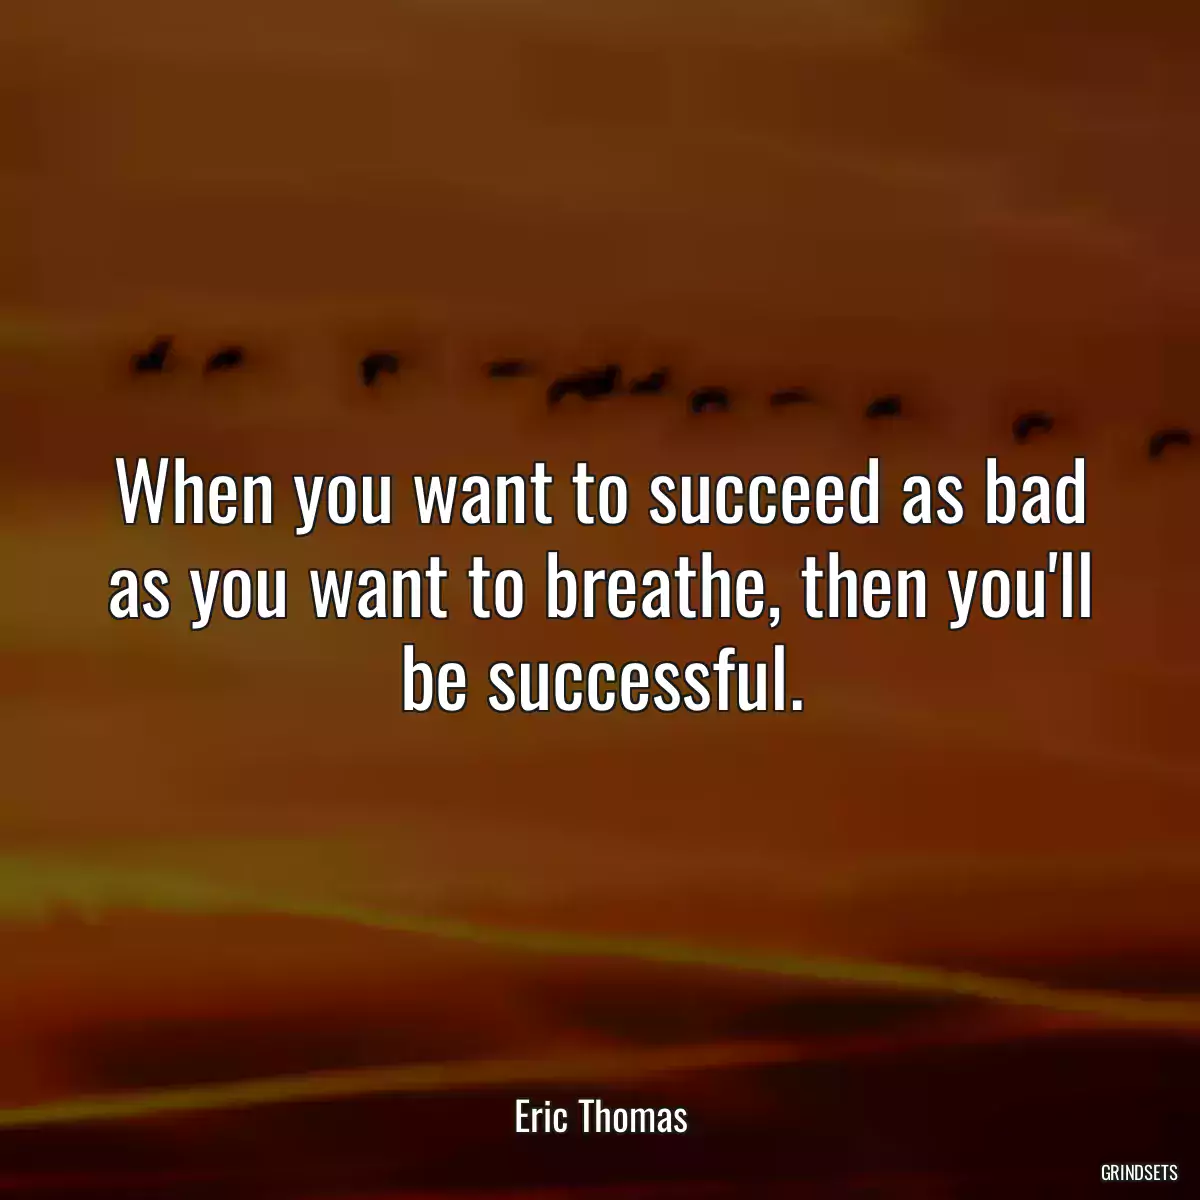 When you want to succeed as bad as you want to breathe, then you\'ll be successful.